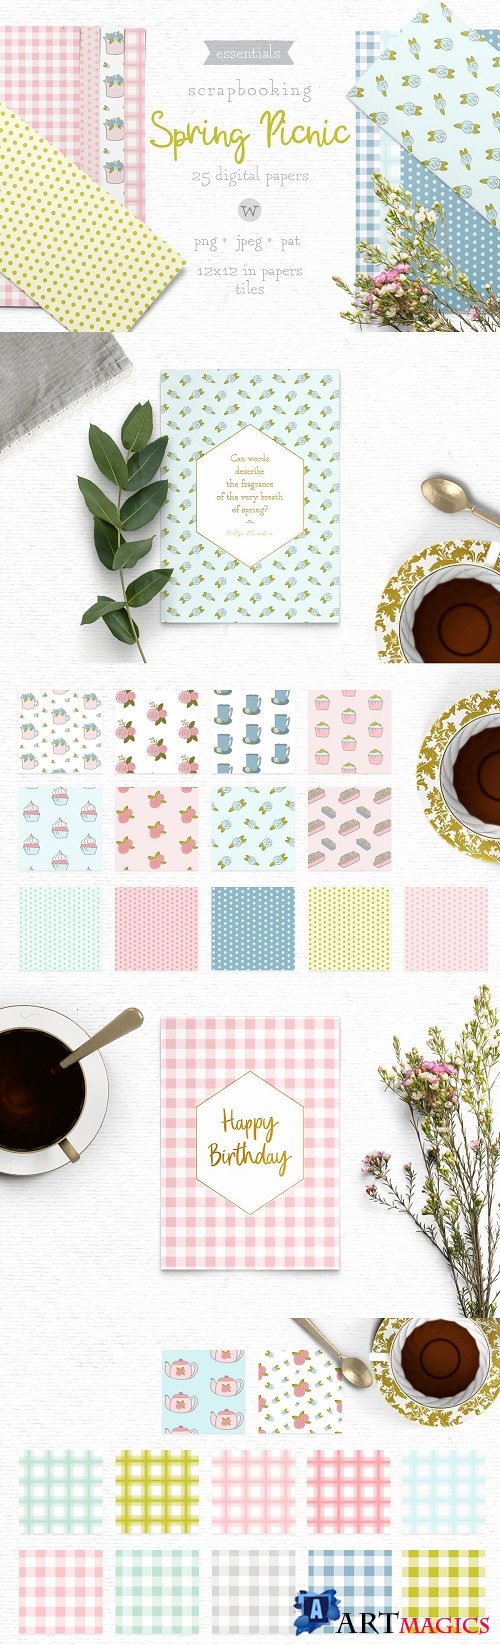 Shabby Chic Papers - 3802953